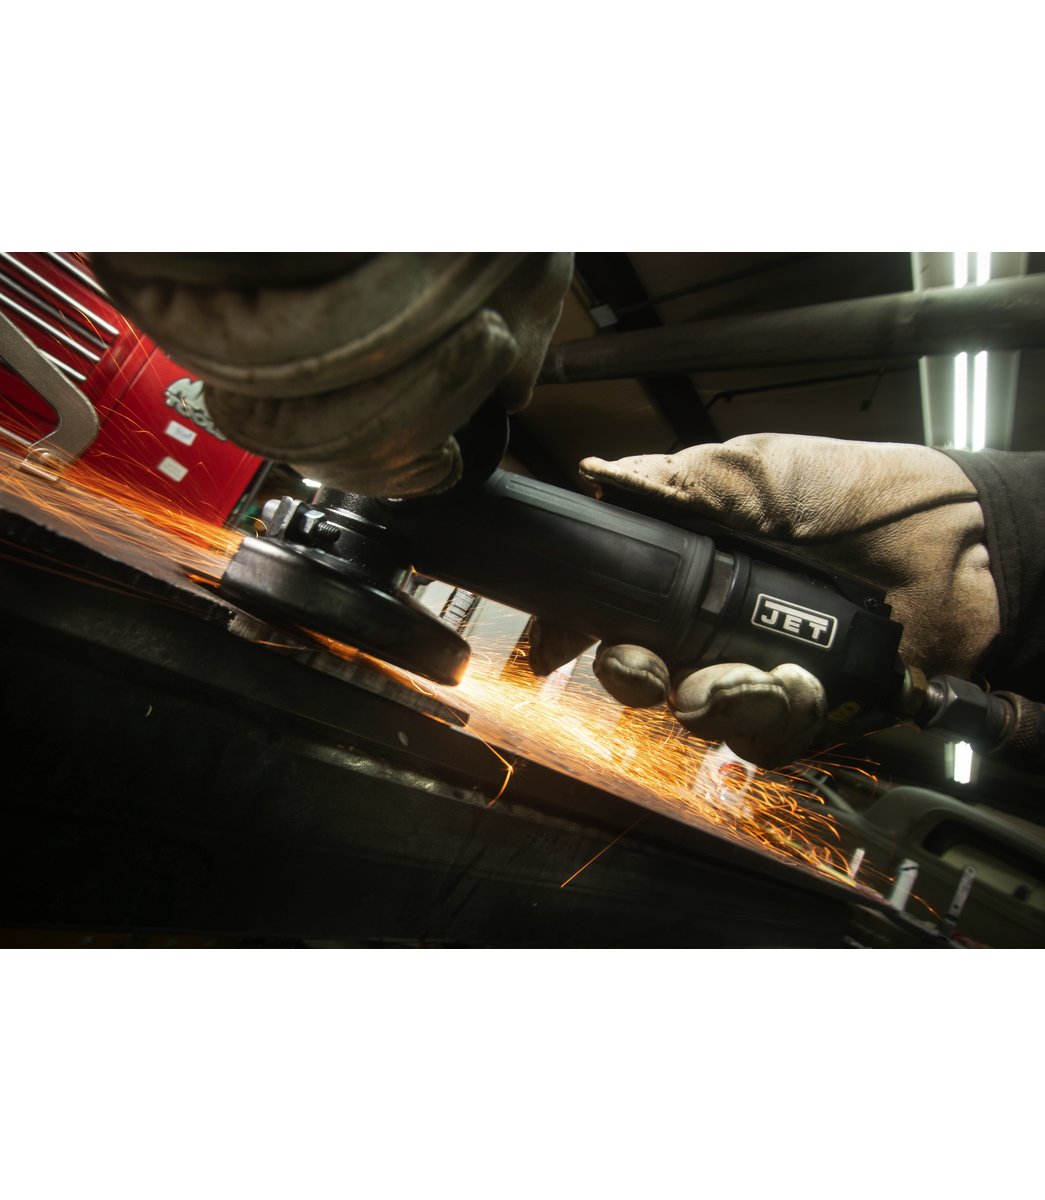 AT-465, 5" Industrial Angle Grinder - Diamond Tool Store